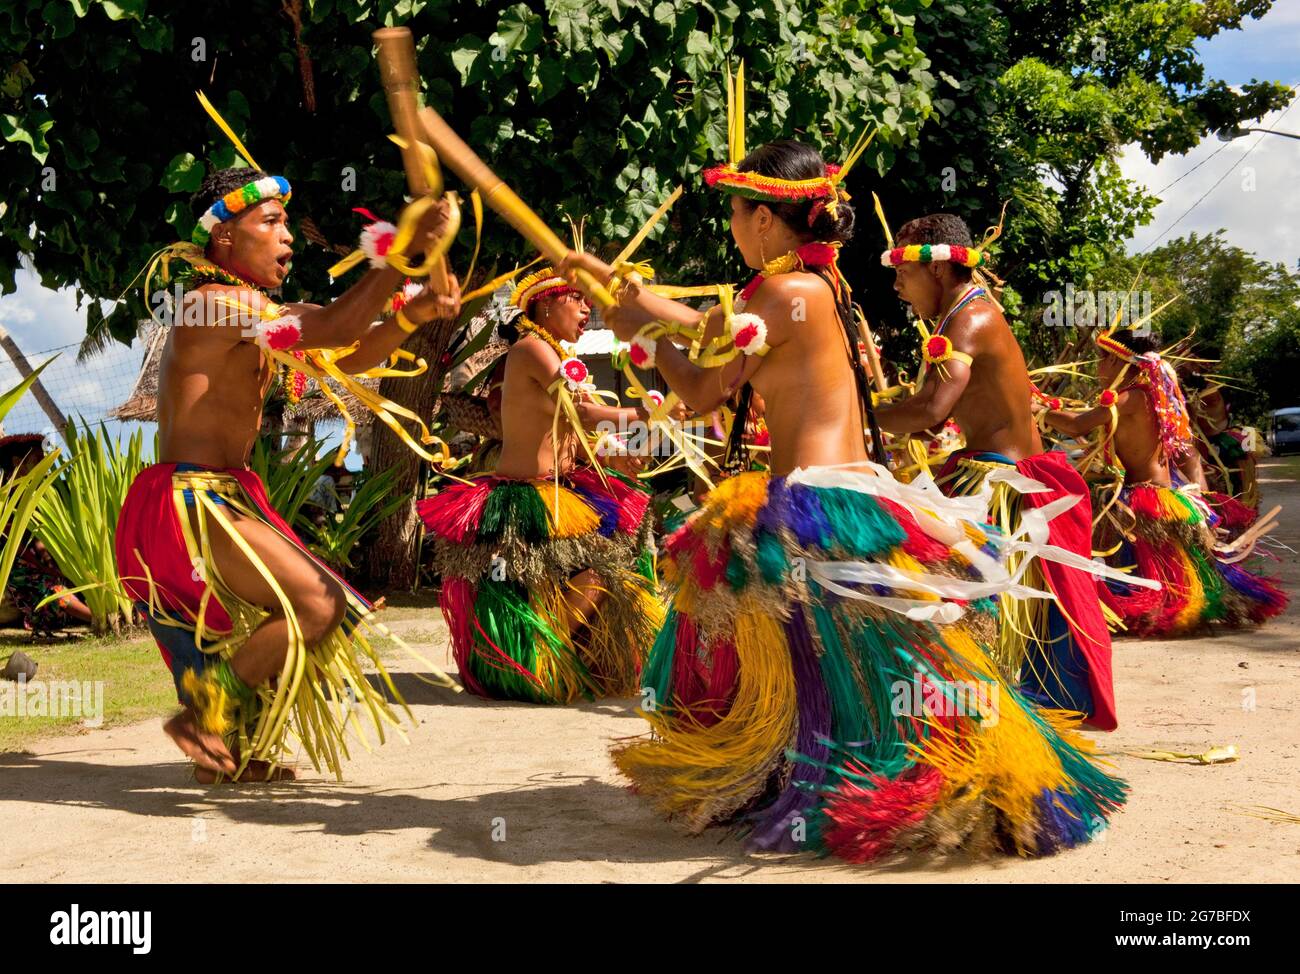 Traditional bamboo dance, Yap Island, Yap Islands, Federated States of Micronesia, Federated States of Micronesia Stock Photo